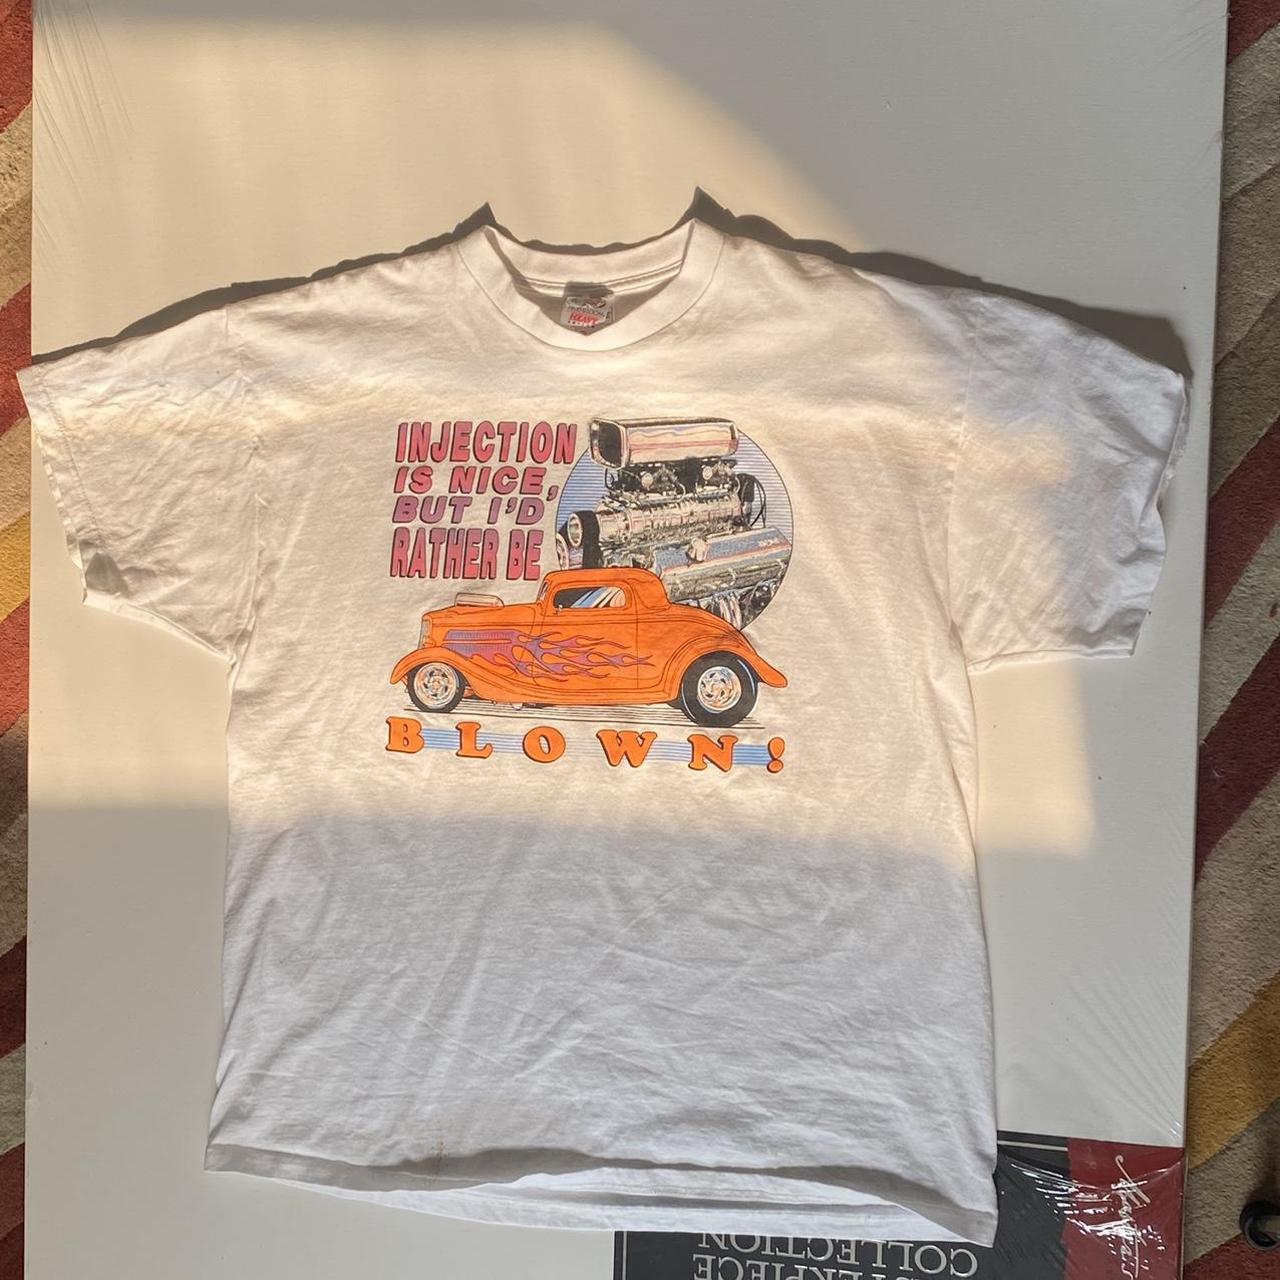 Vintage car tshirt A little stain on the... - Depop